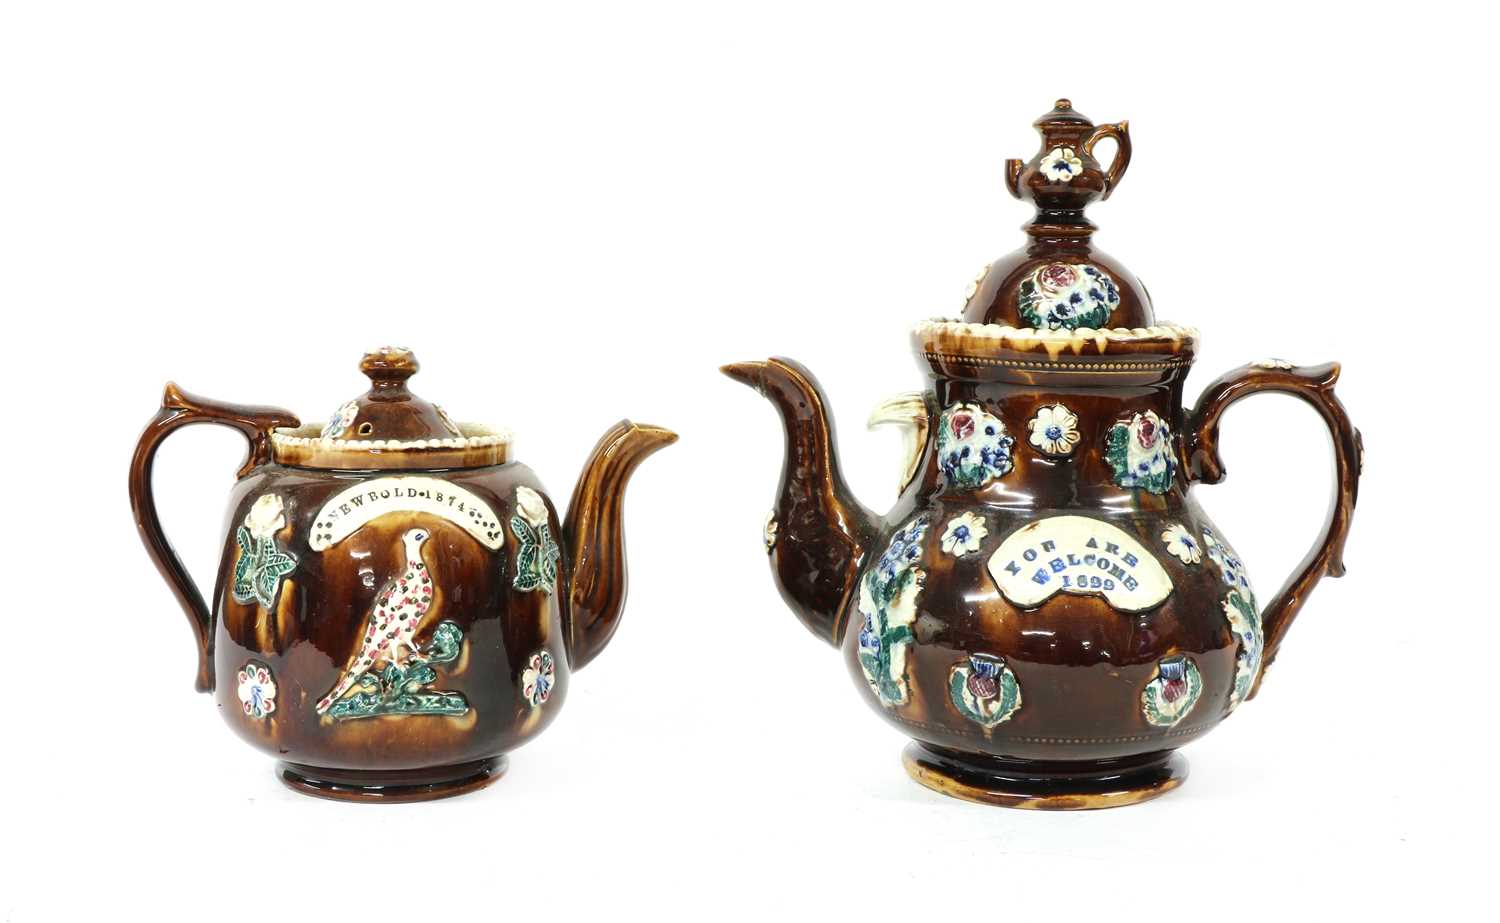 Lot 86 - Two barge teapots and covers